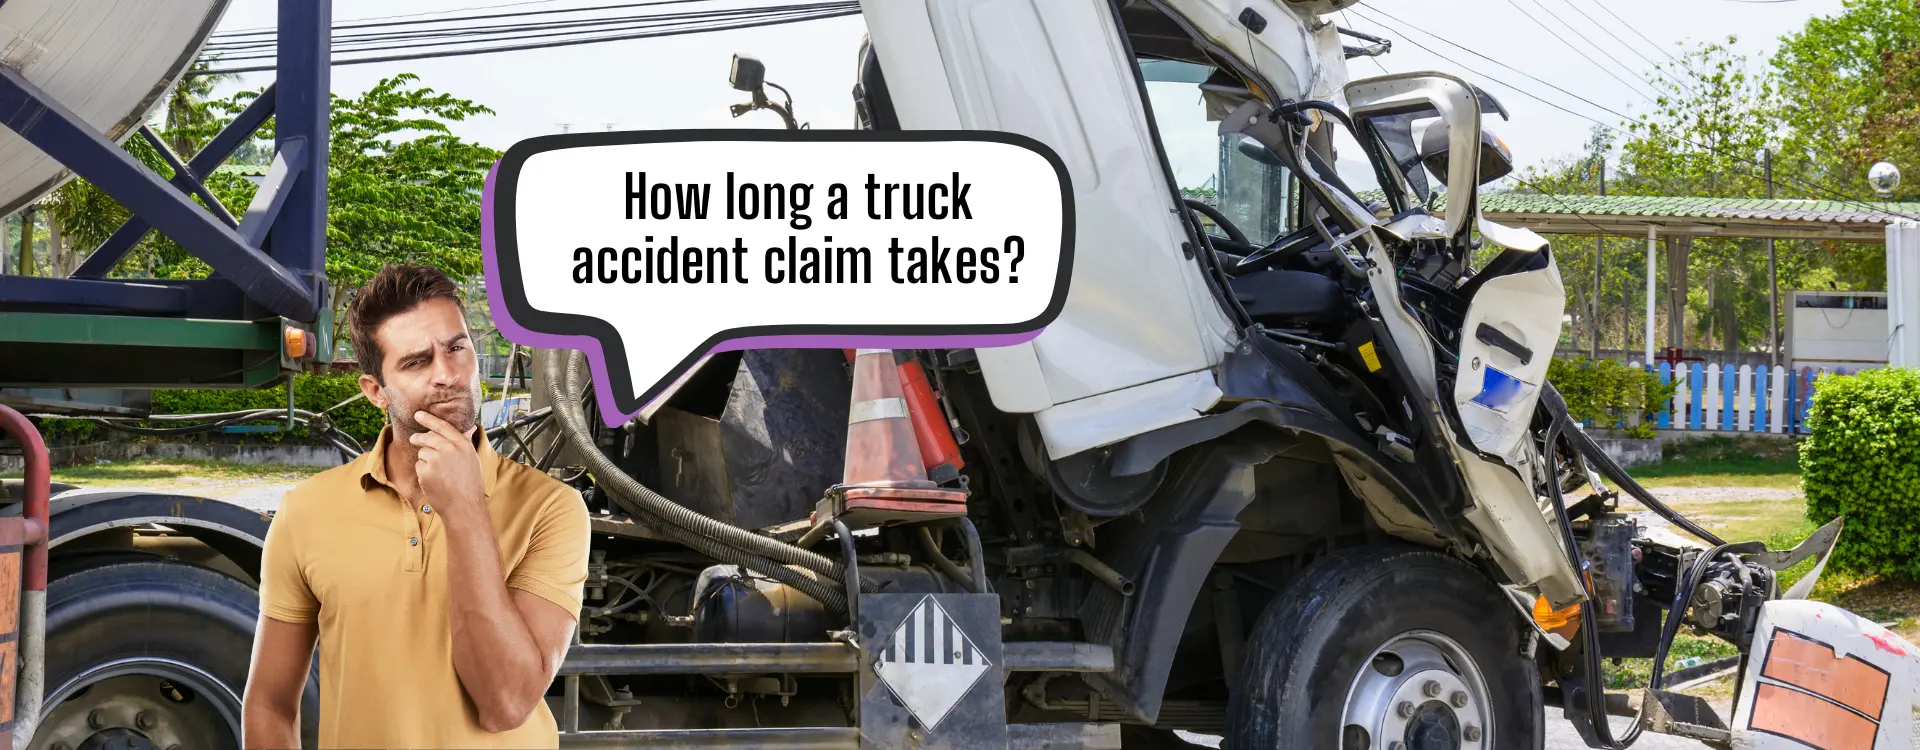 factors affecting how long a truck accident claim takes